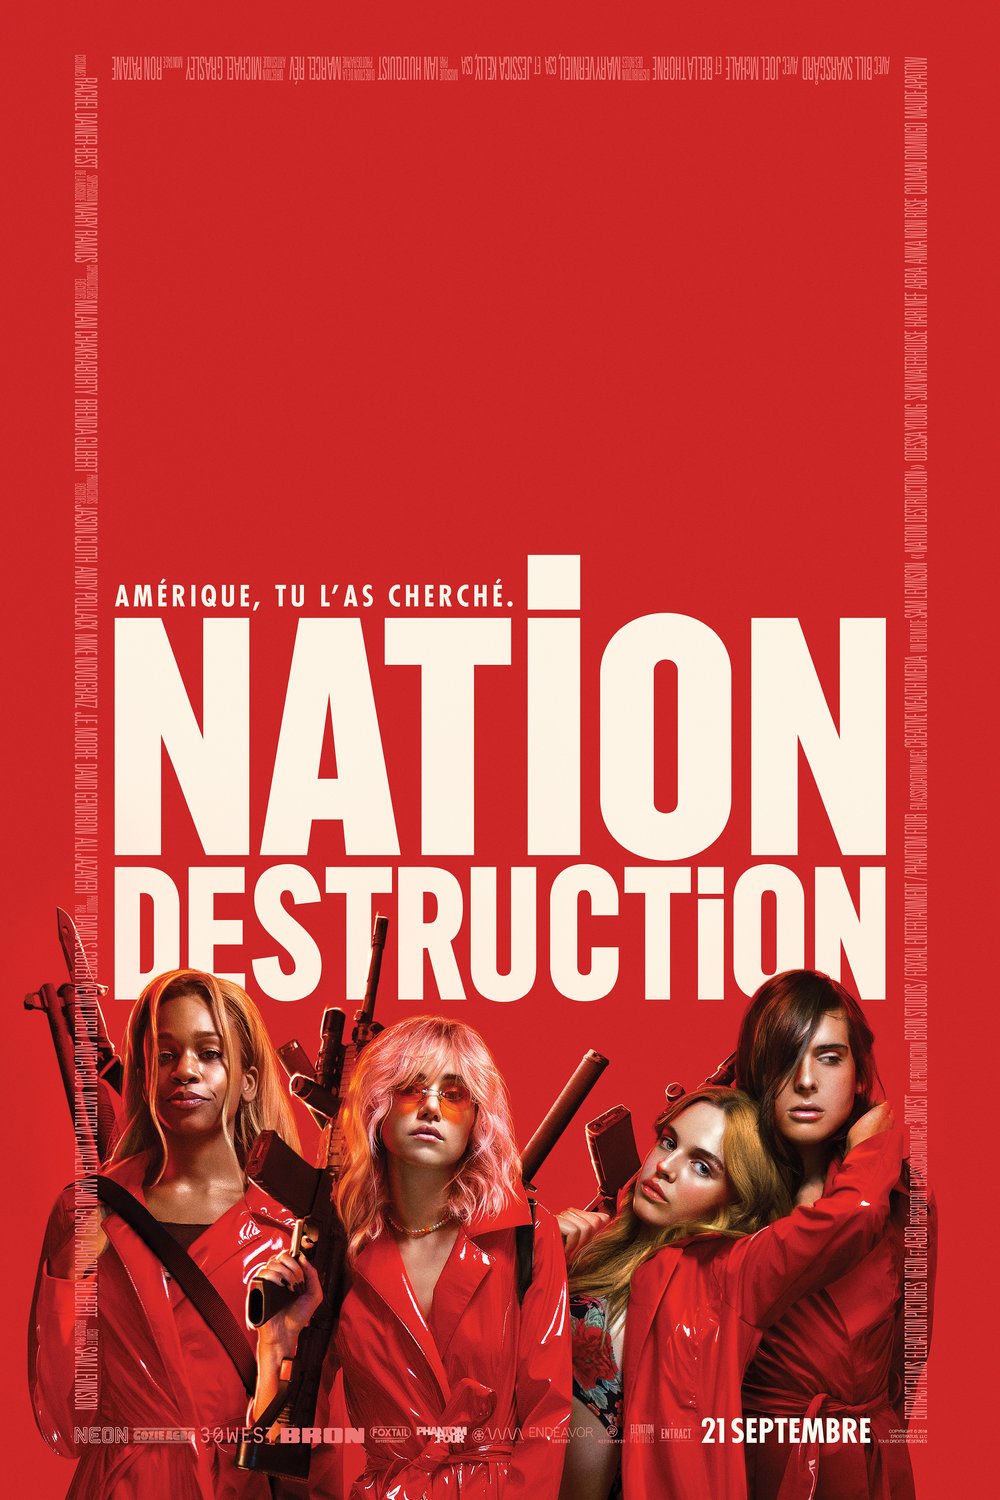 Poster of the movie Nation destruction